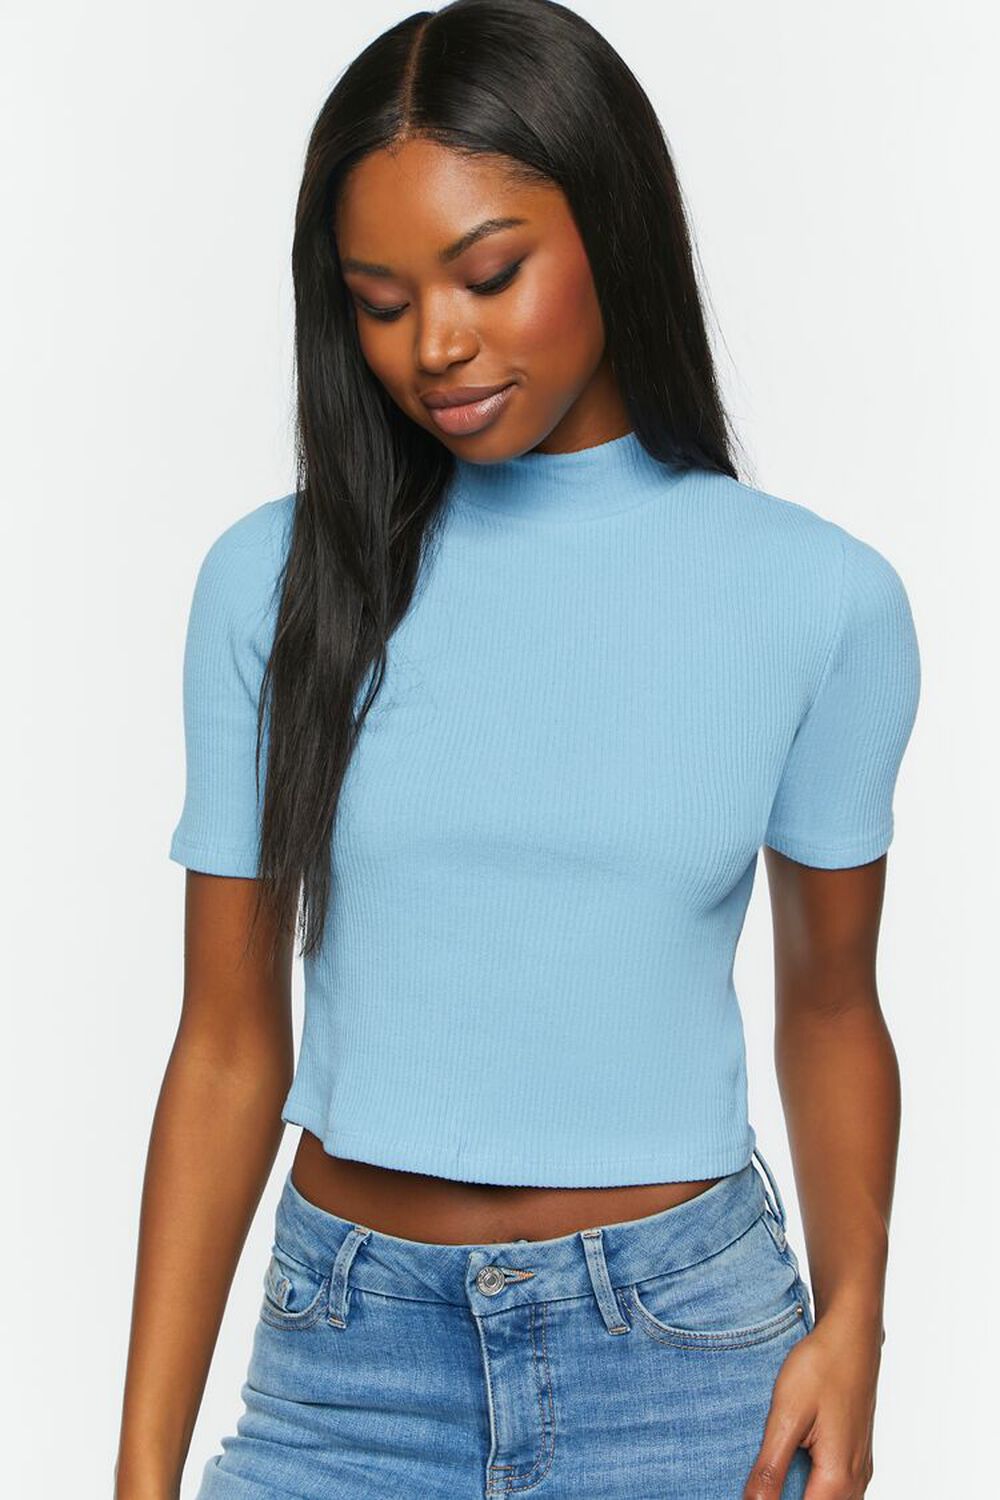 FAIENCE Ribbed Short-Sleeve Mock Neck Top, image 1